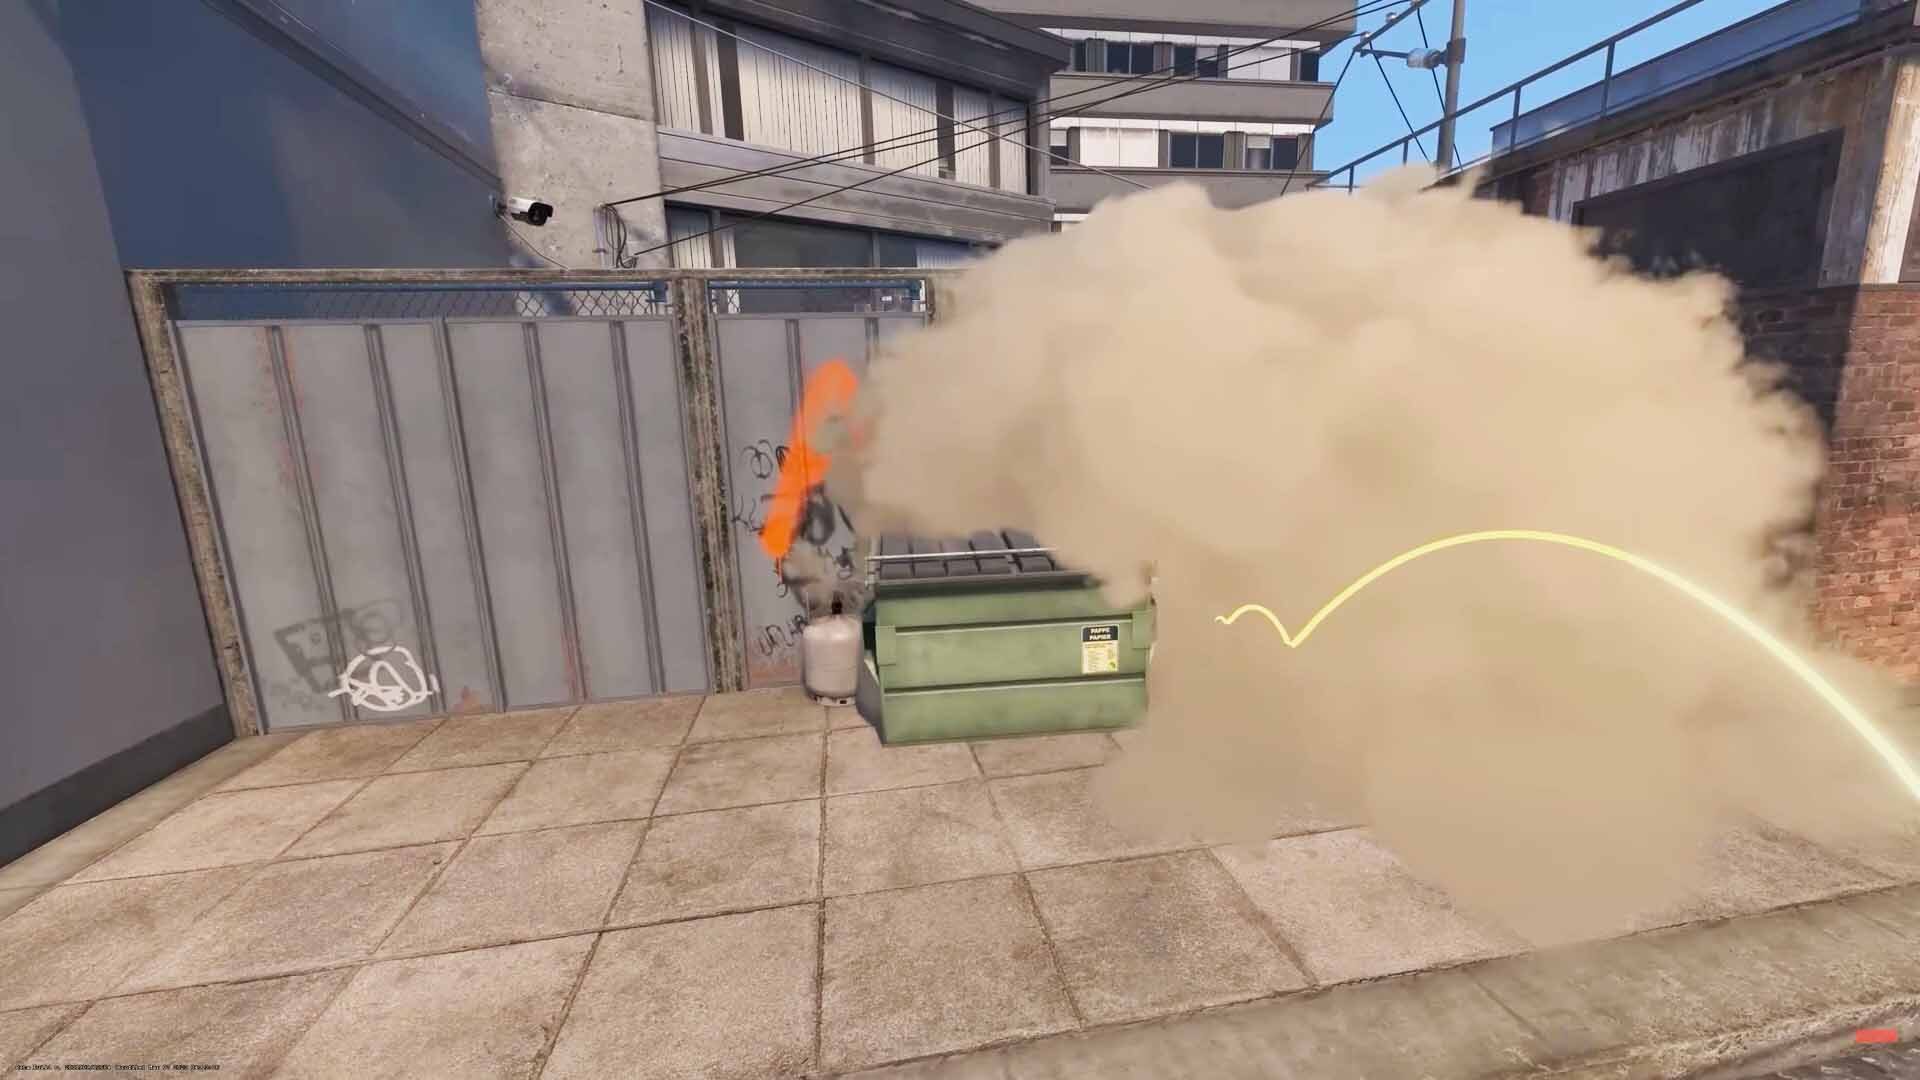 Counter-Strike 2 will feature dynamic and volumetric smokes.